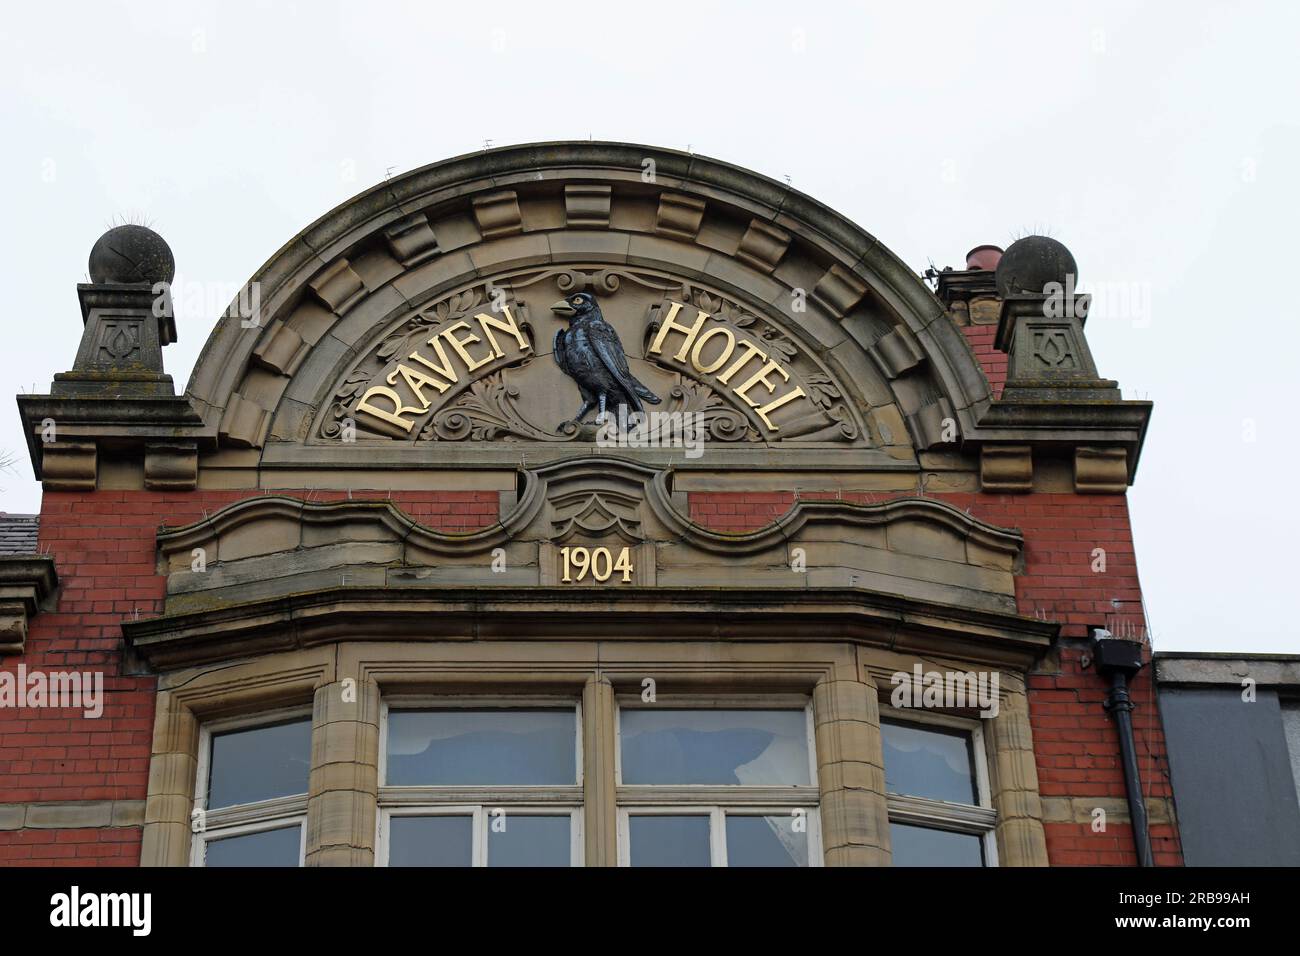 Raven Hotel at Wigan in Greater Manchester Stock Photo